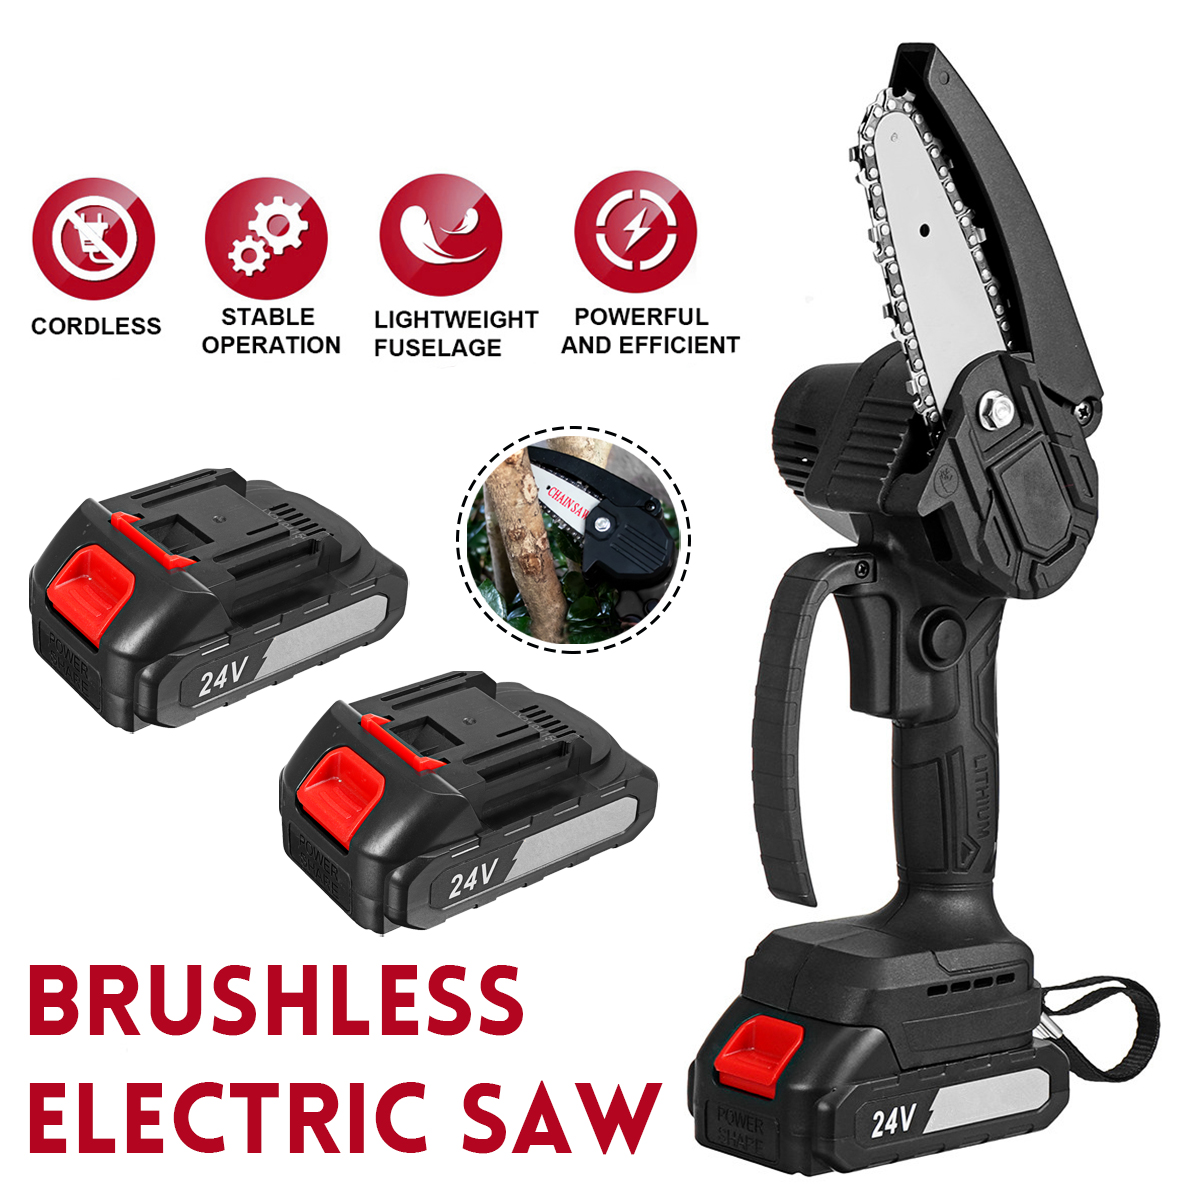 4inch-24V-Rechargeable-Brushless-Electric-Chain-Saw-Woodworking-Tool-Wood-Cutter-ChainSaws-W-12pcs-B-1858870-3